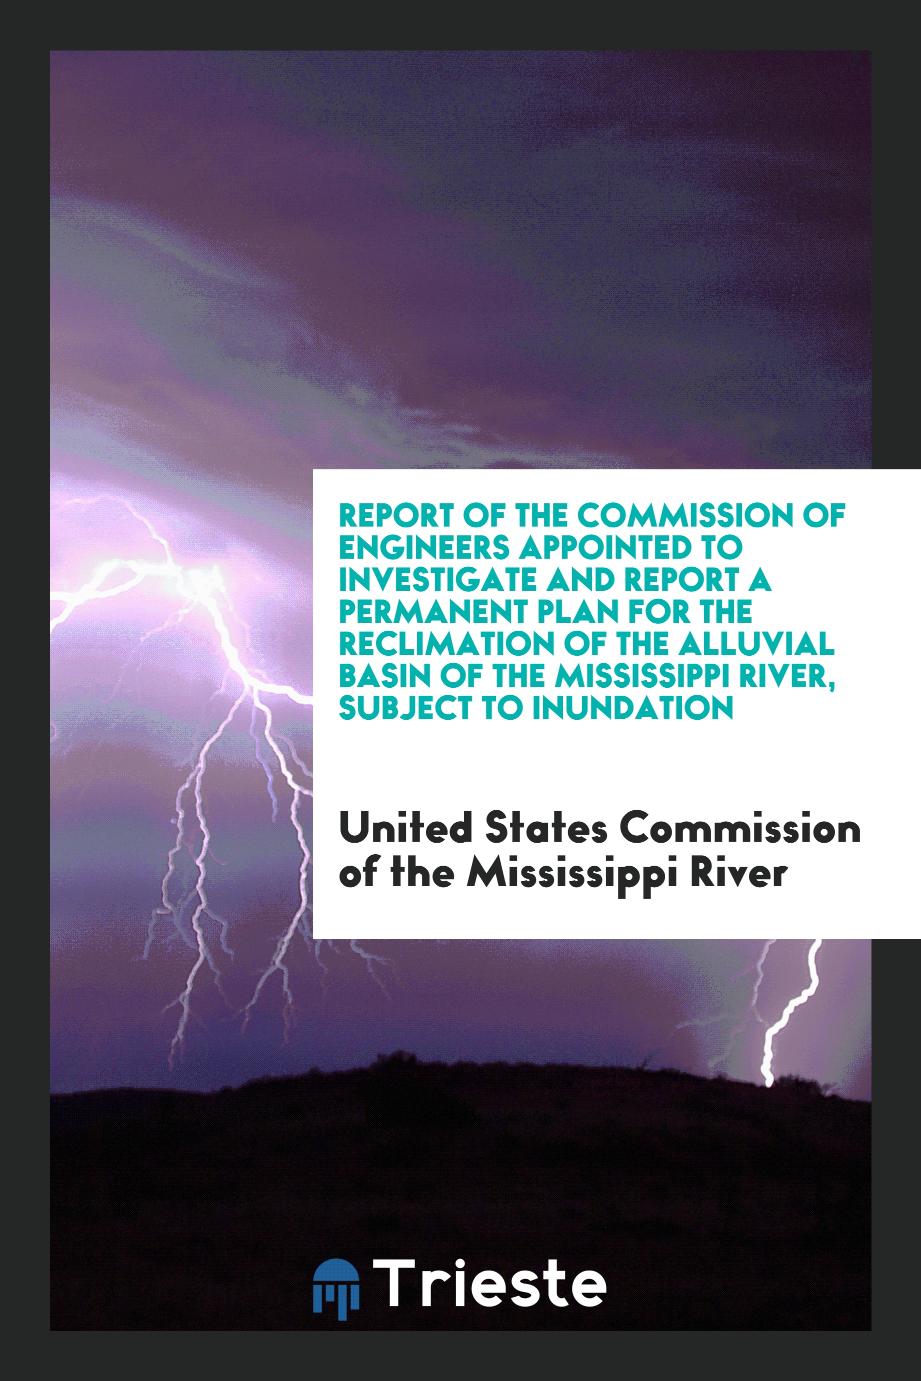 Report of the Commission of Engineers Appointed to Investigate and Report a Permanent Plan for the Reclimation of the Alluvial Basin of the Mississippi River, Subject to Inundation